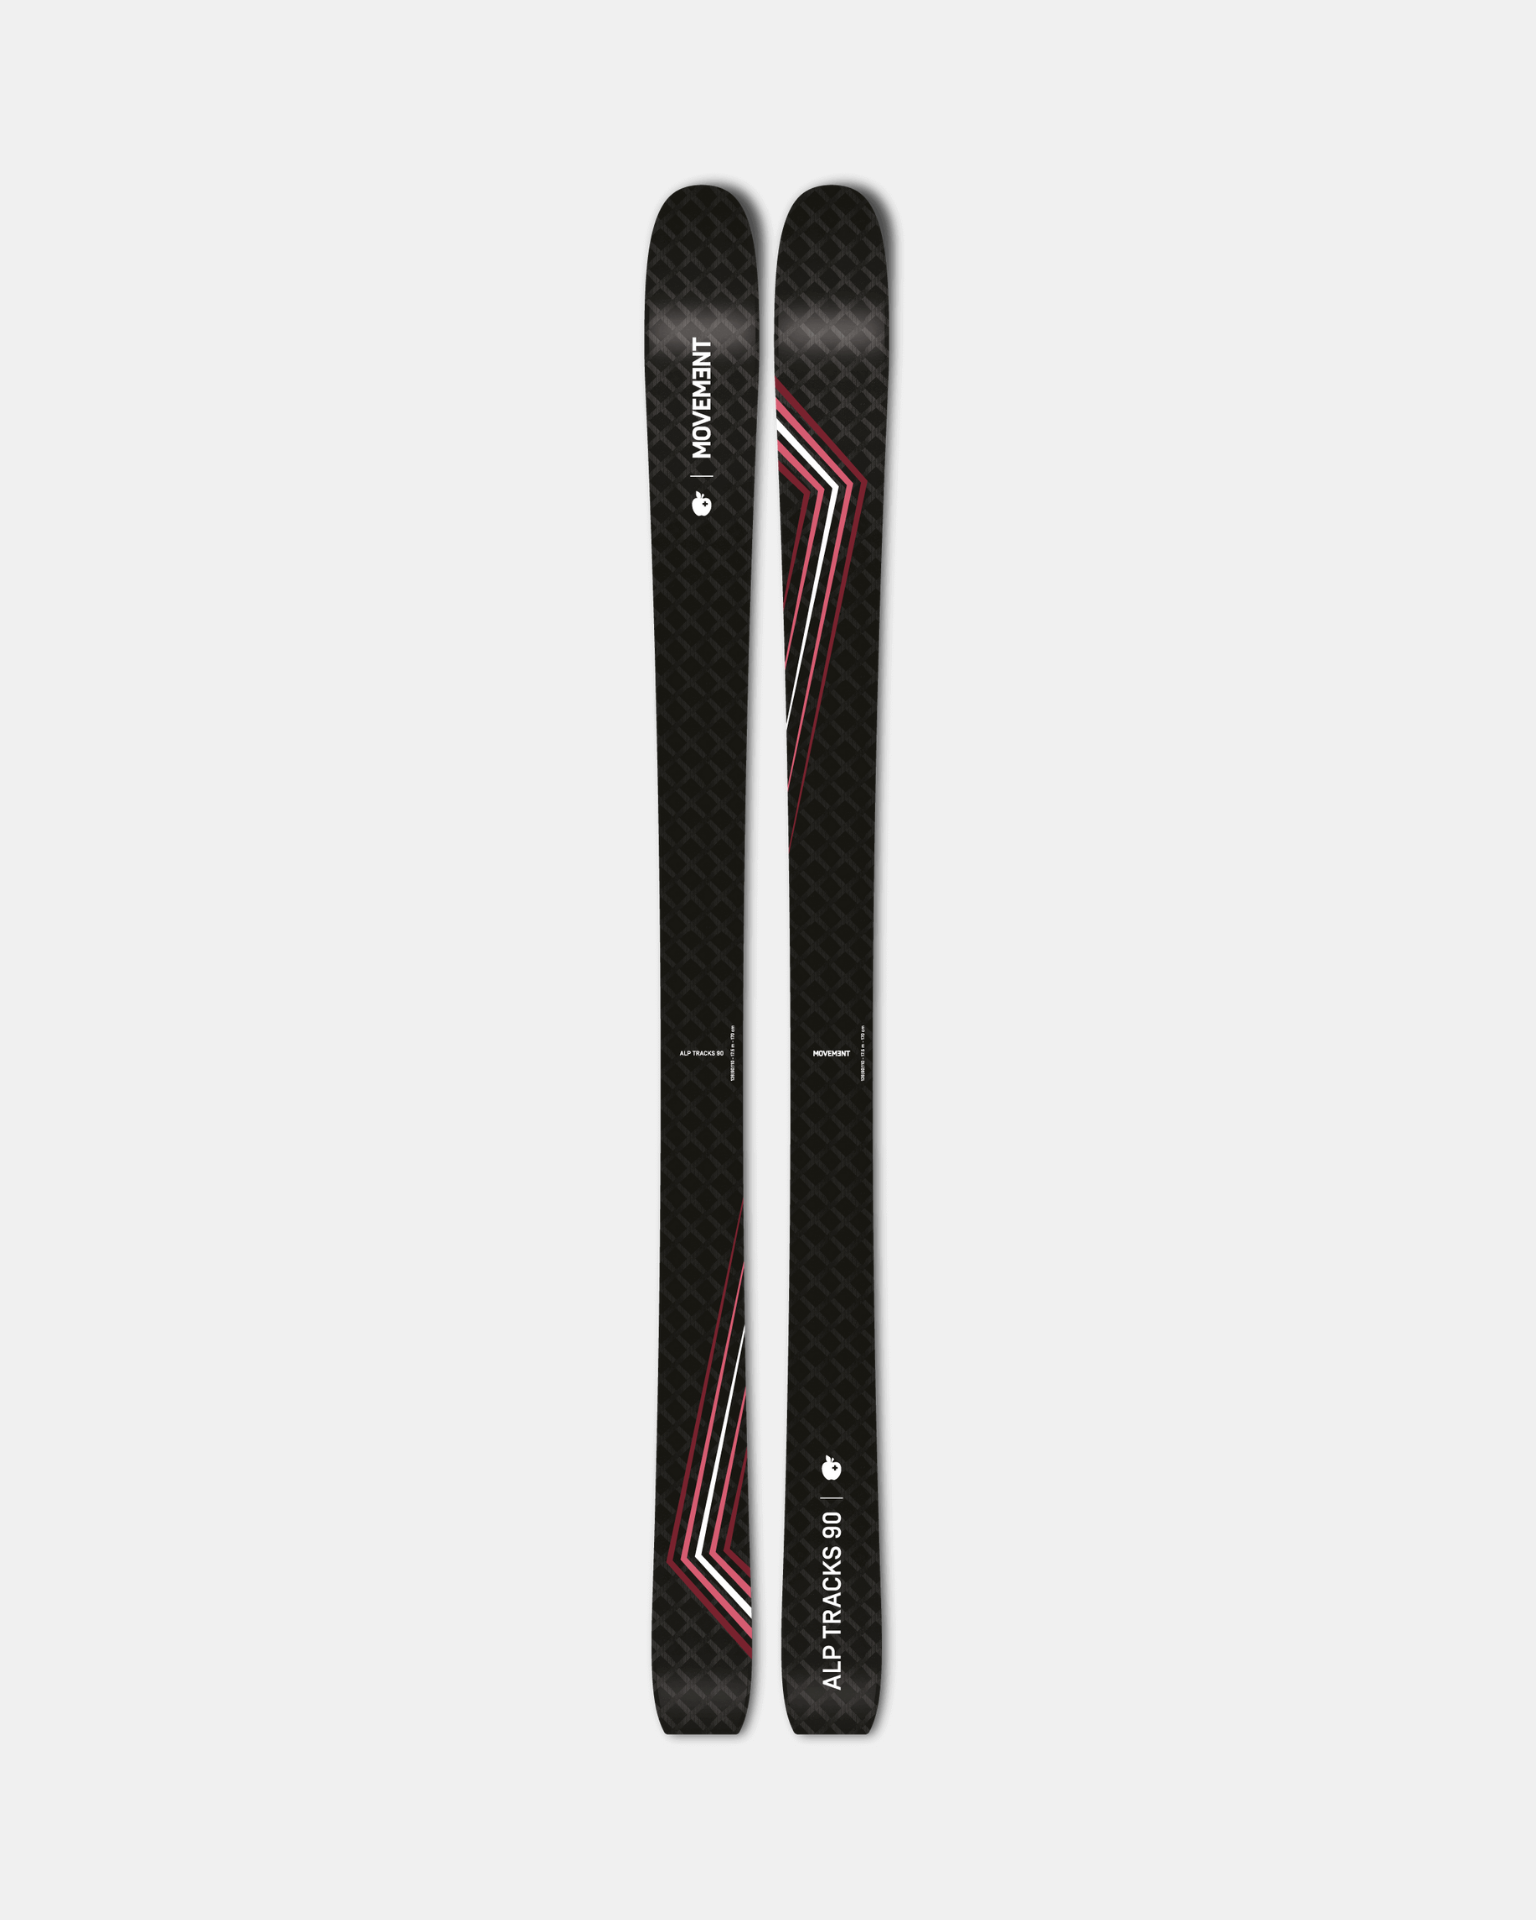 Embrace the mountains with Movement's Alp Tracks 90W skis as your companion.